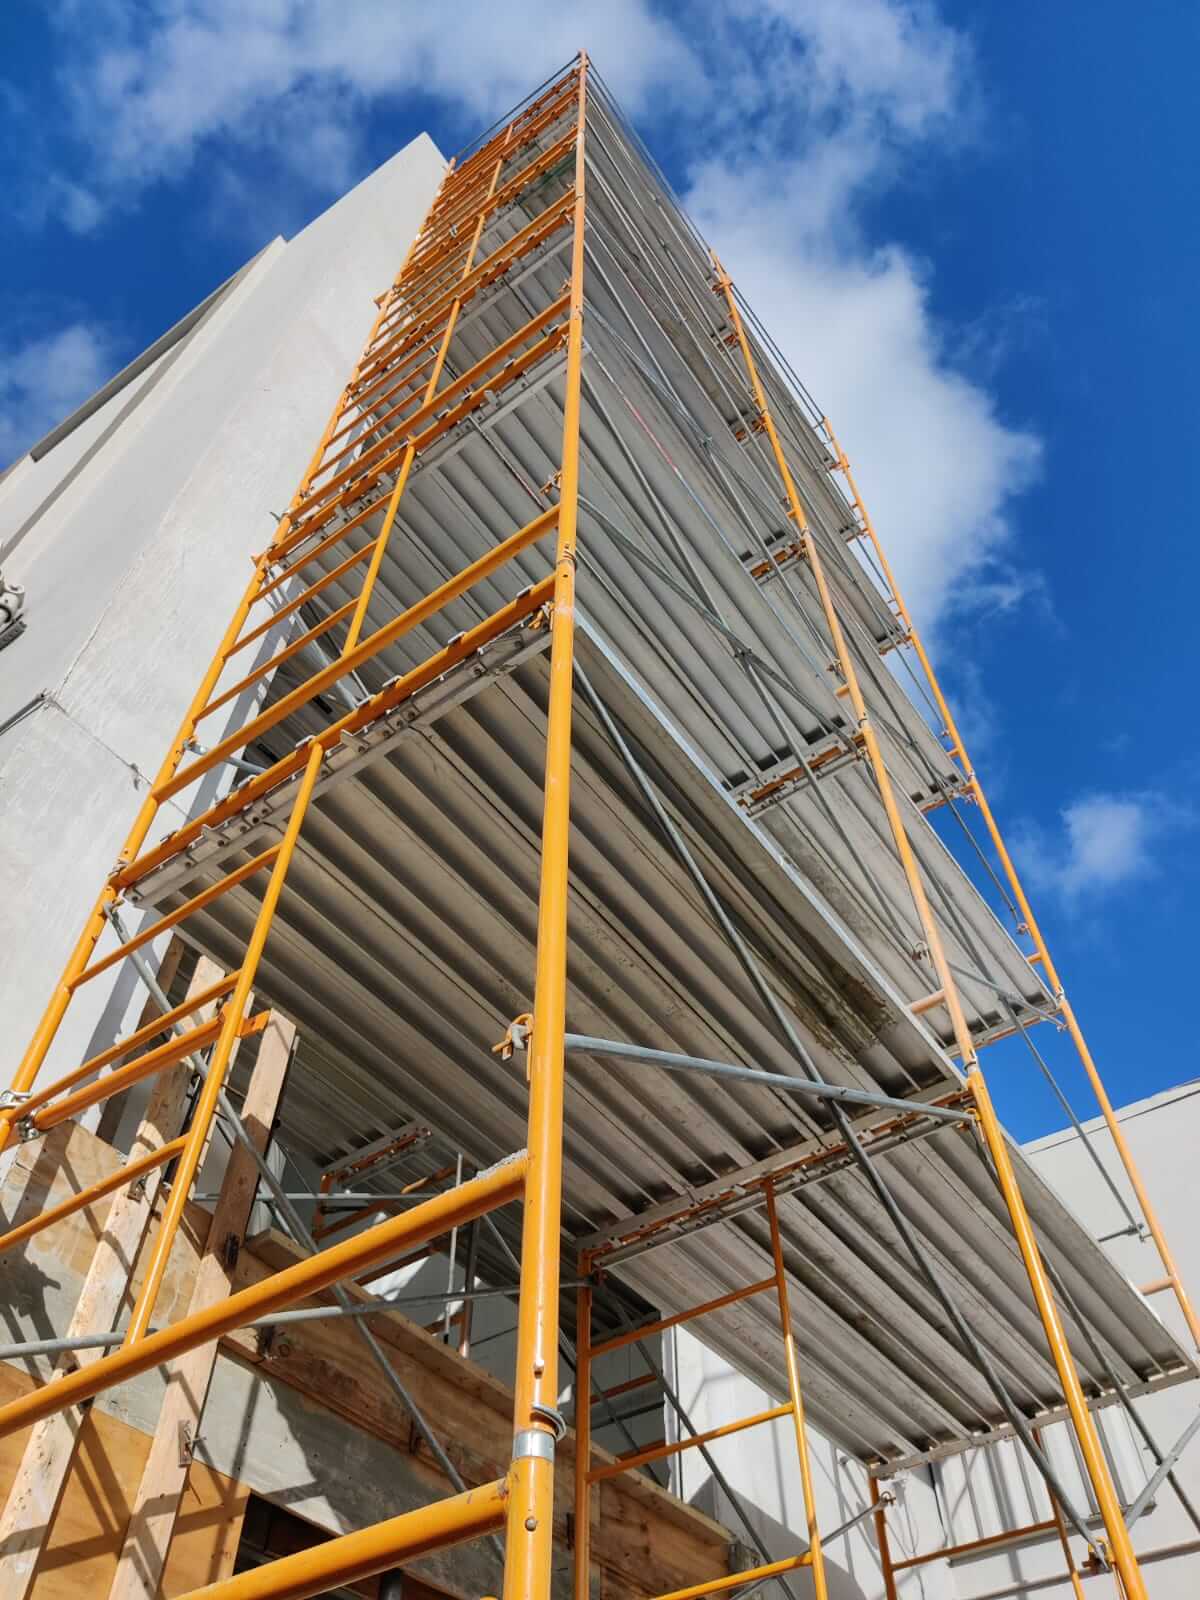 scaffold rental prices